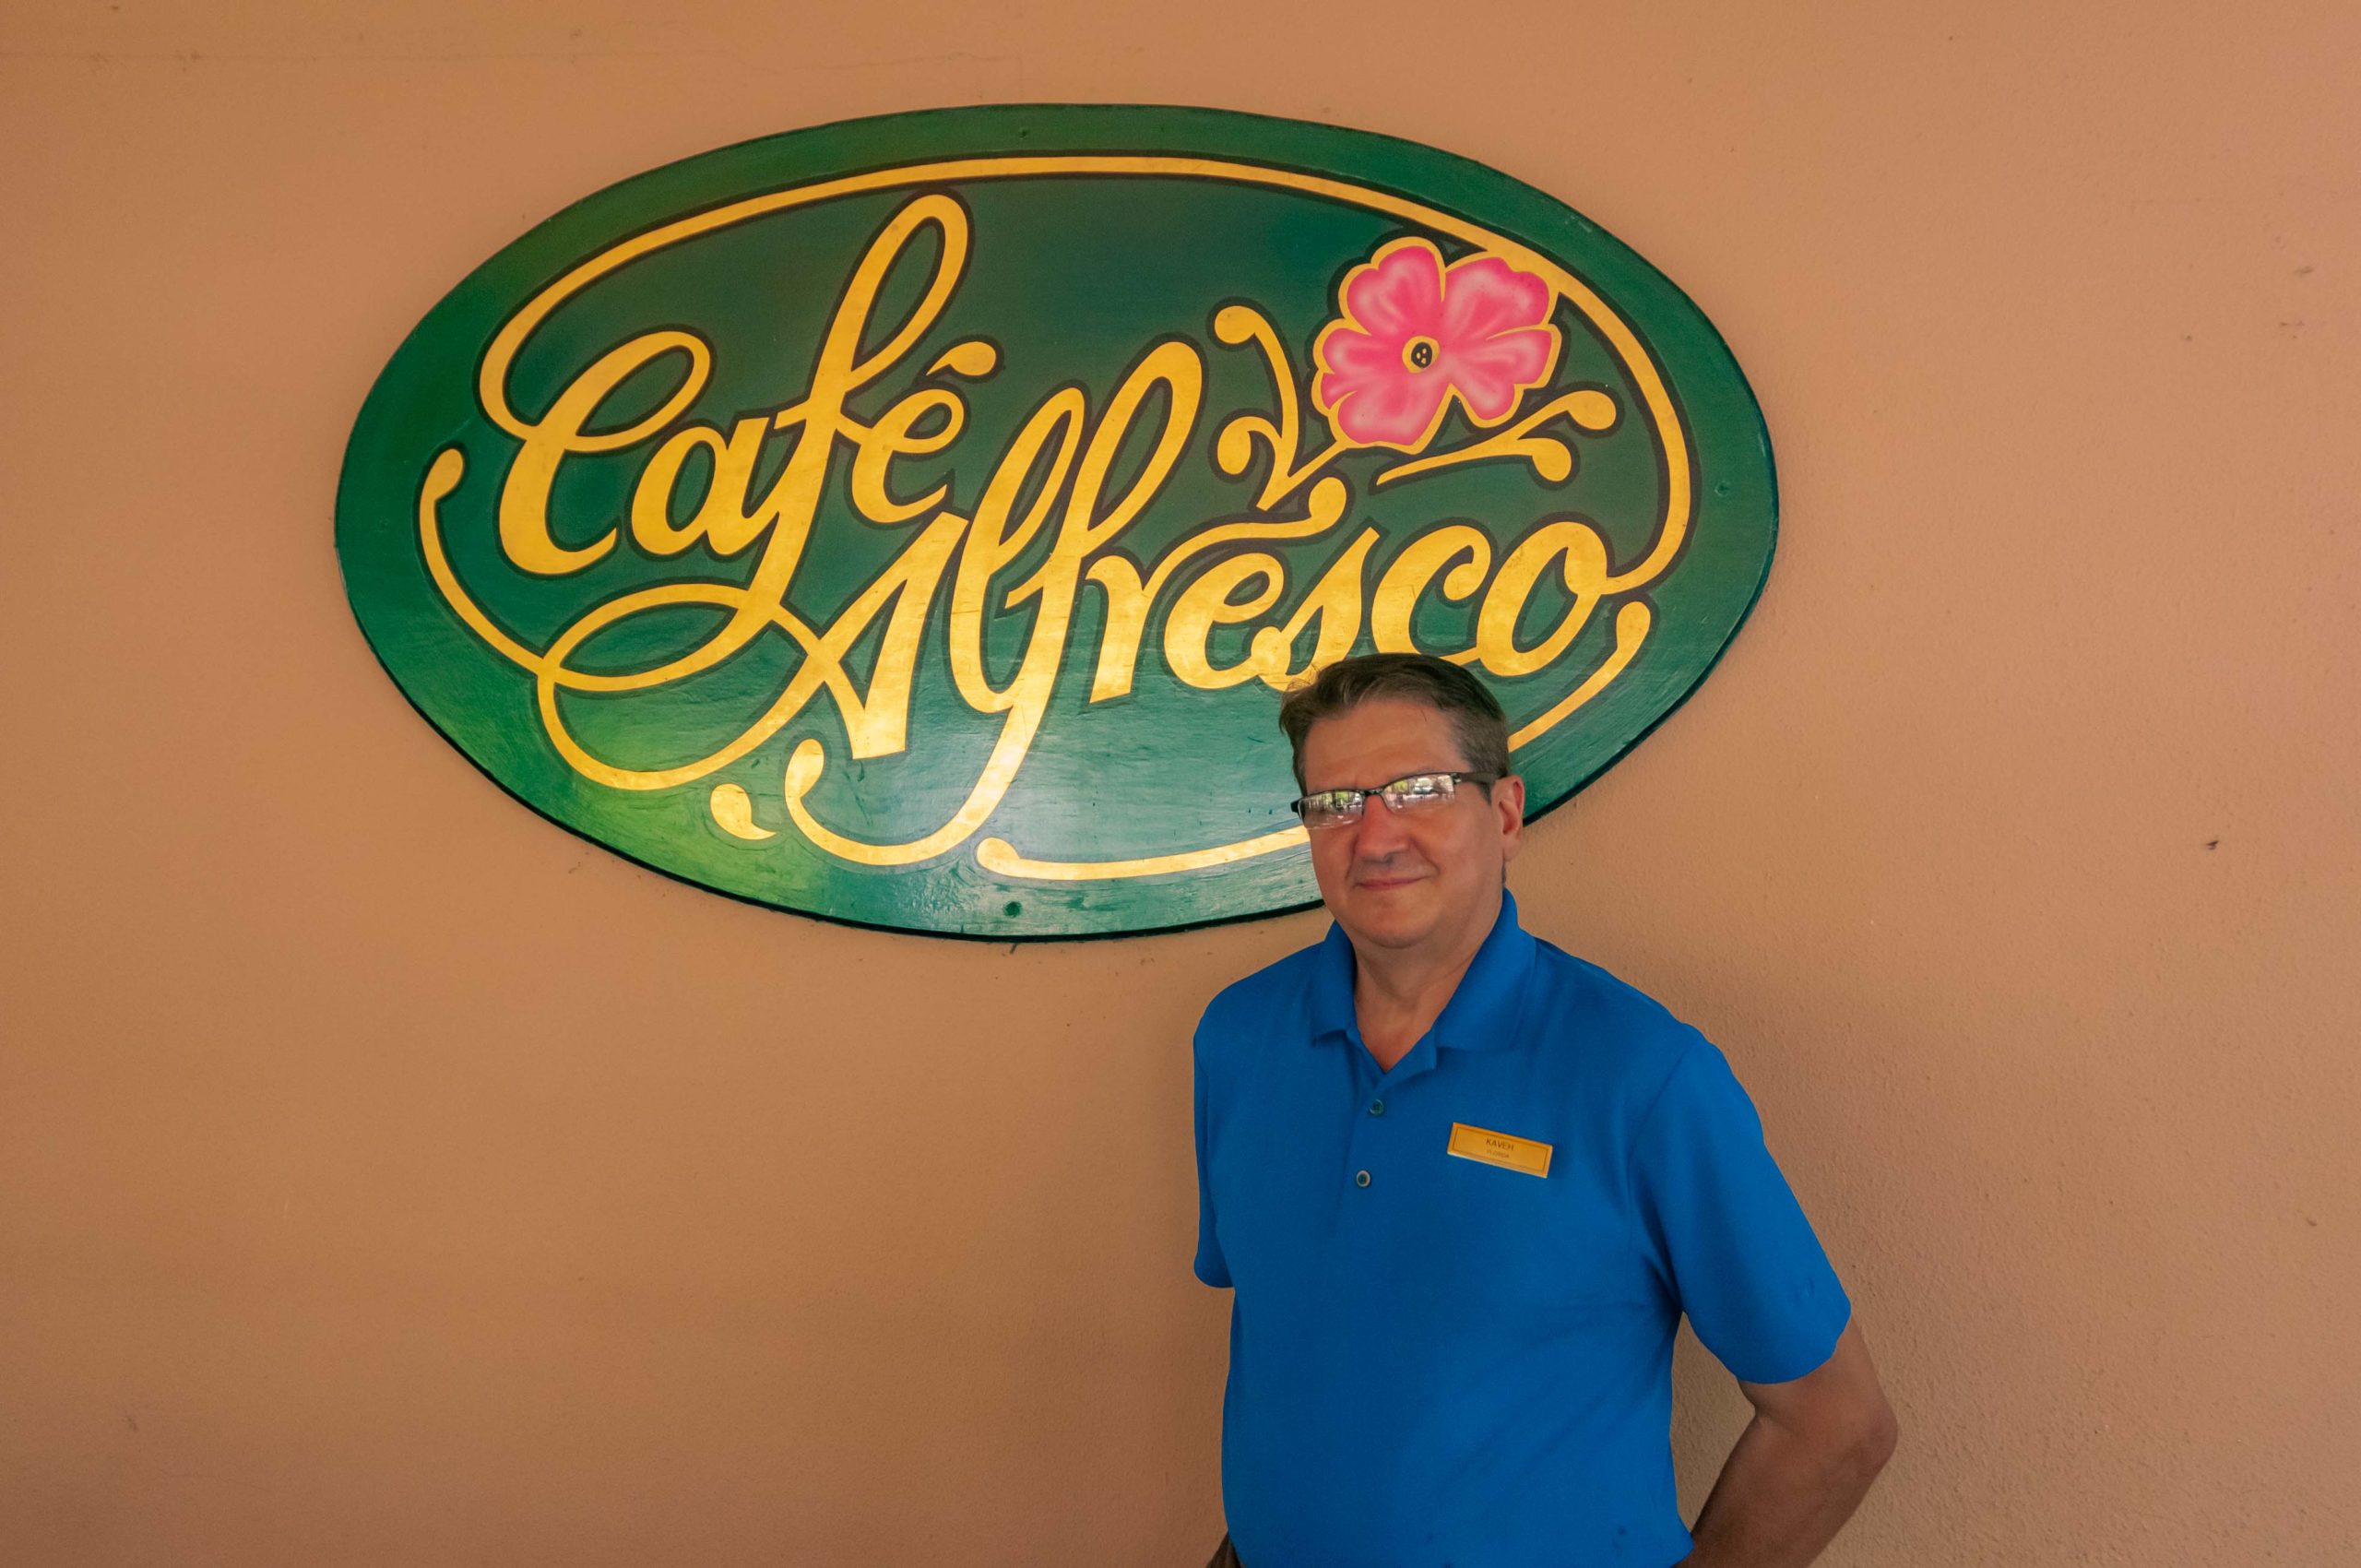 Ann standing in front of the Café Alfresco sign on the patio